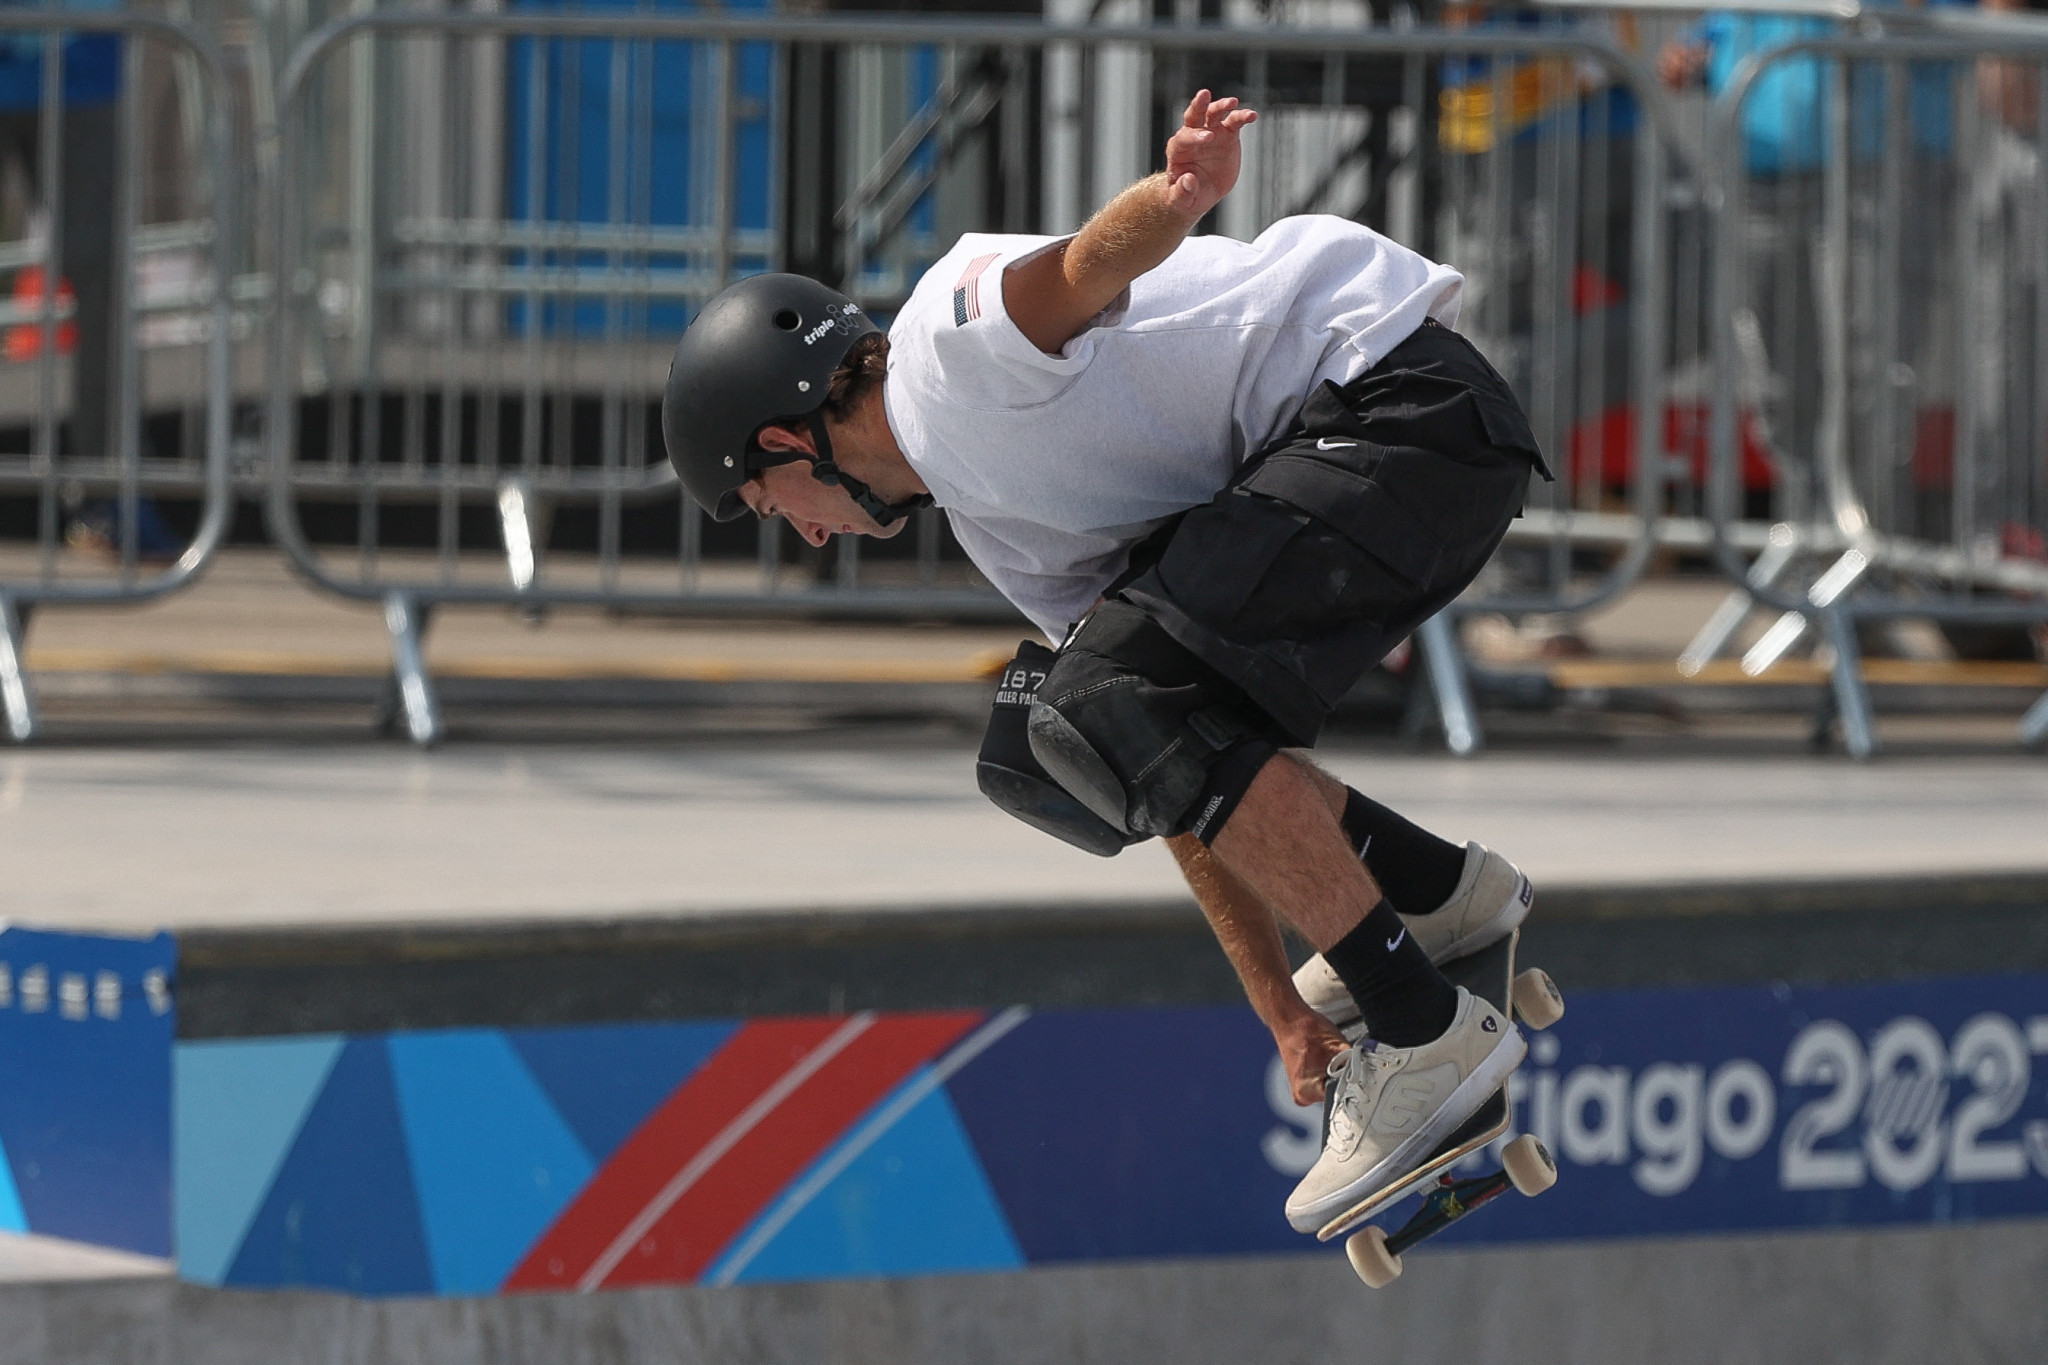 Taylor Nye won the men's park title in skateboarding ©Getty Images